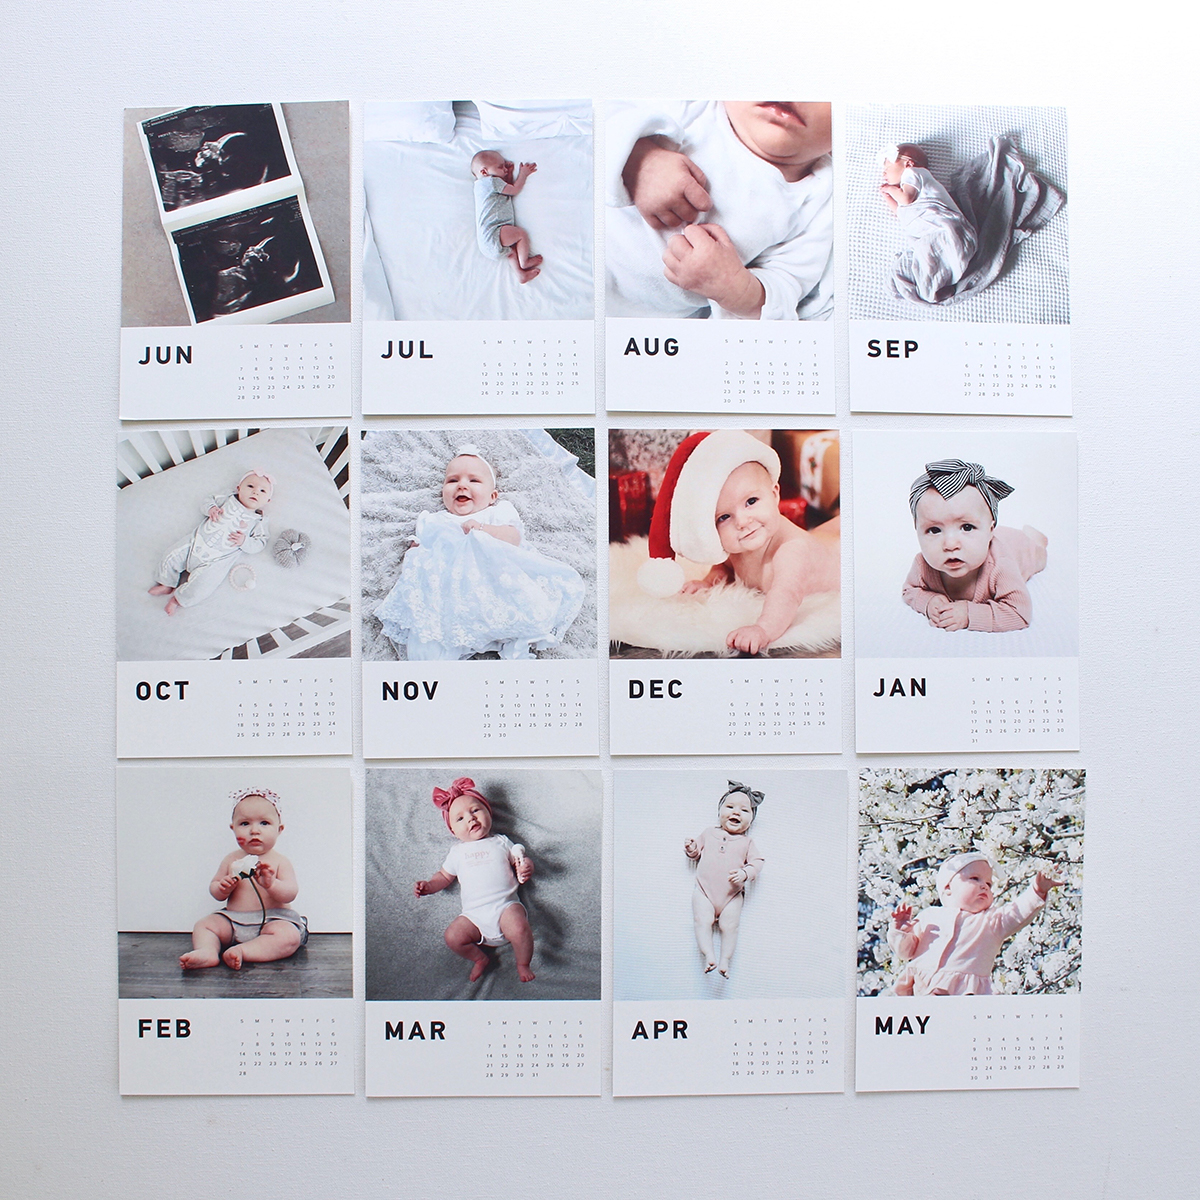 all 12 months of a baby photo calendar laid out next to one another